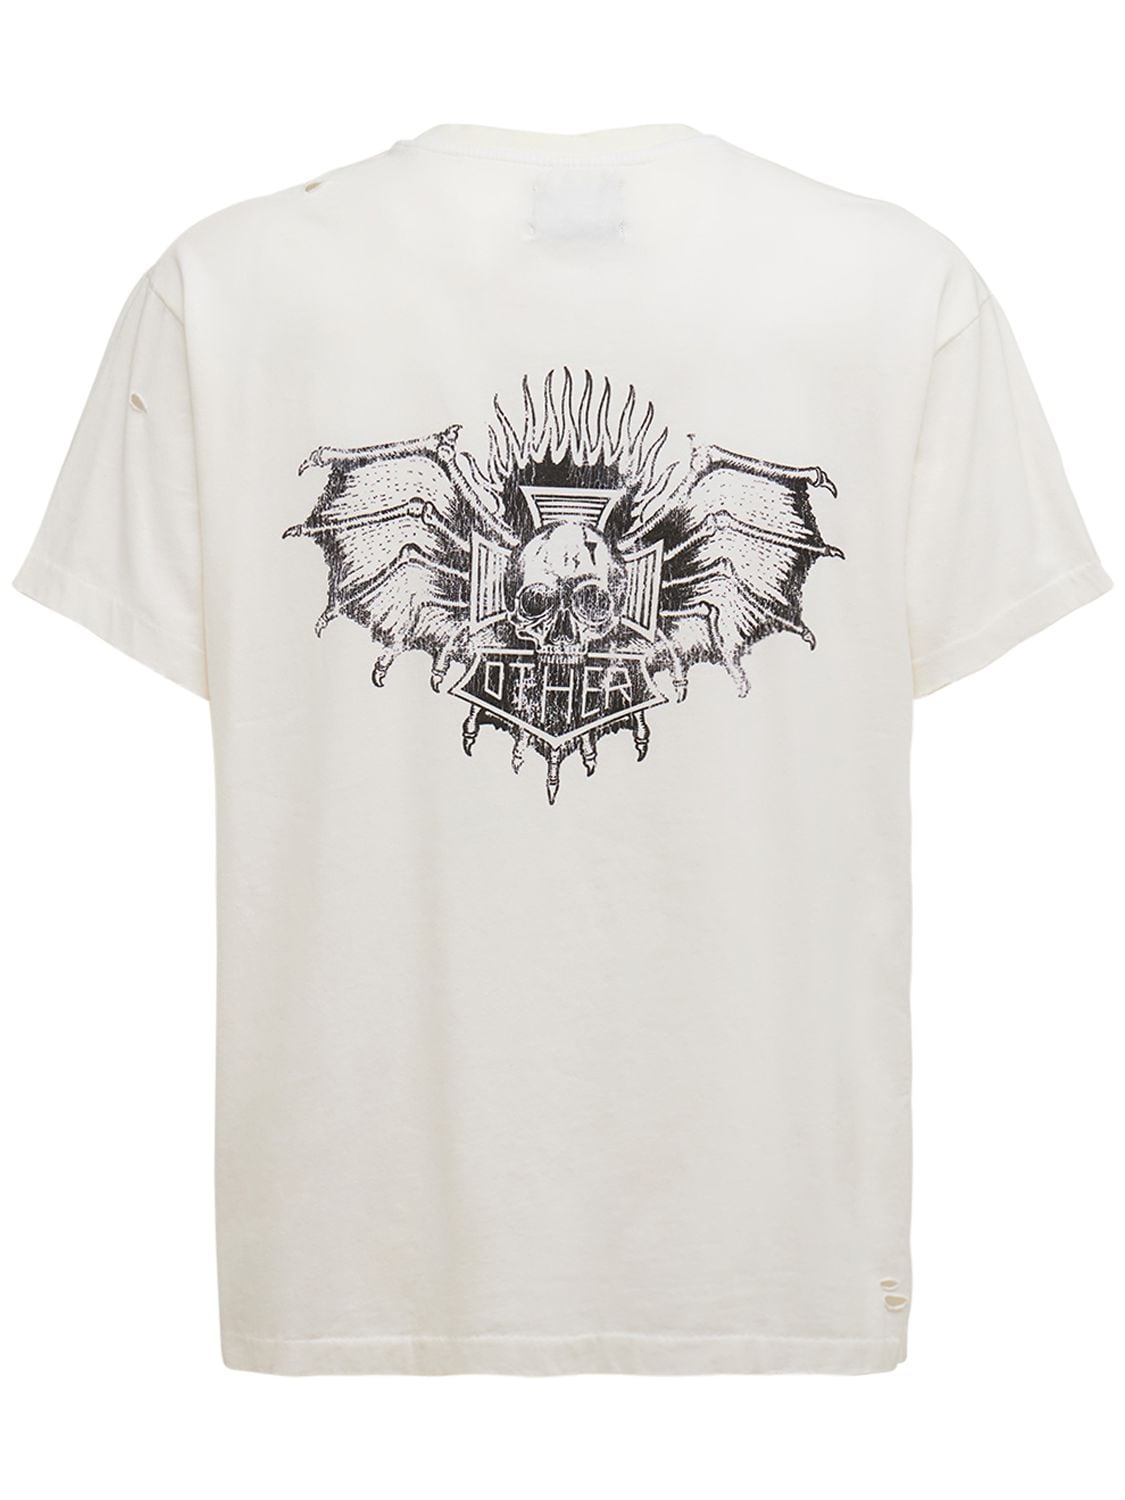 Other Death Skull Mono Printed Cotton T-shirt In White